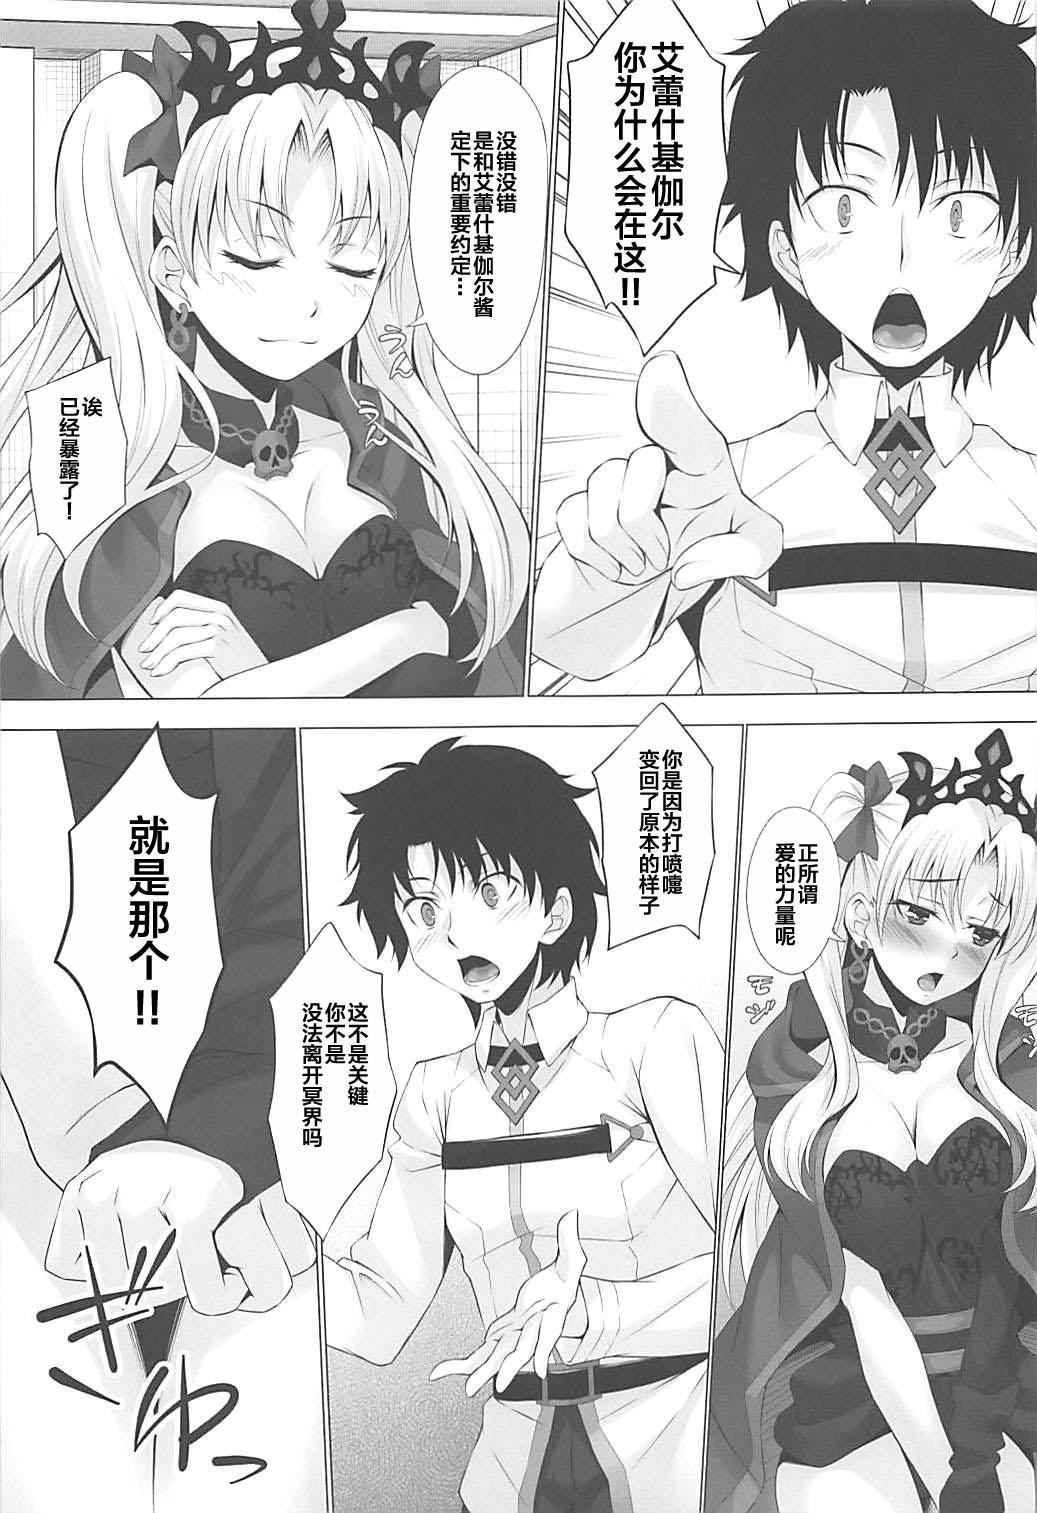 Mas HELP ME... - Fate grand order Stroking - Page 7